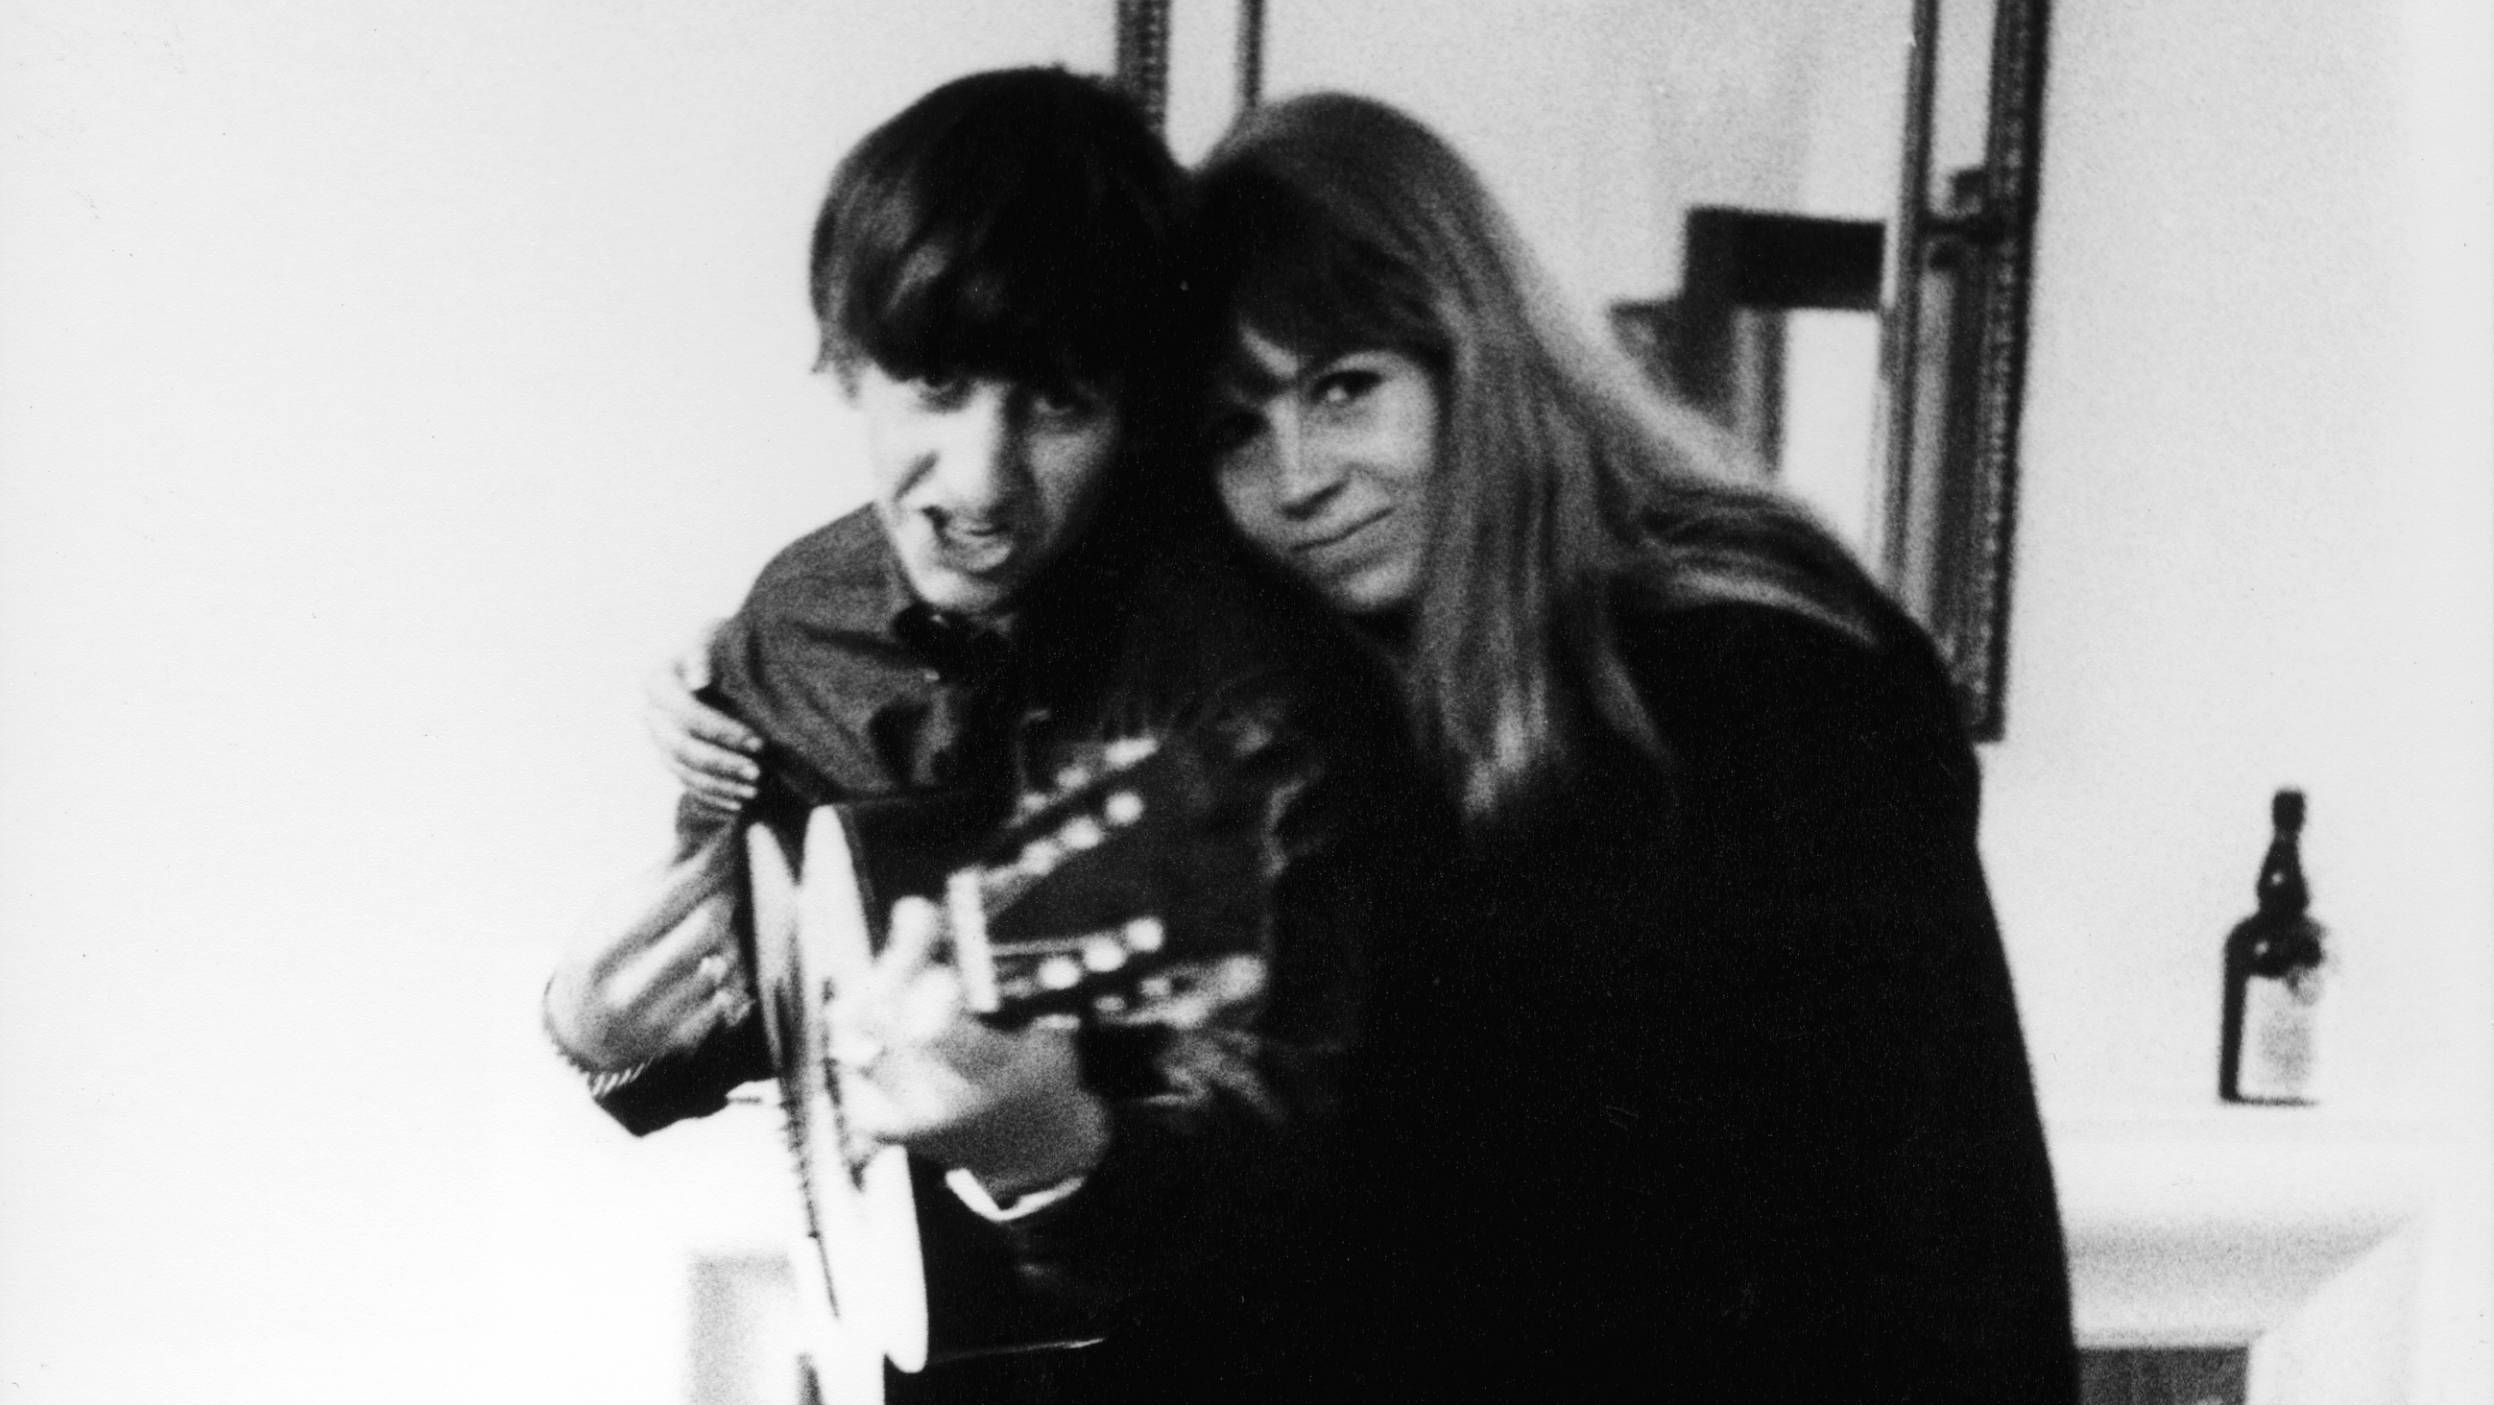 Ringo Starr and Astrid Kirchherr in an undated photo.